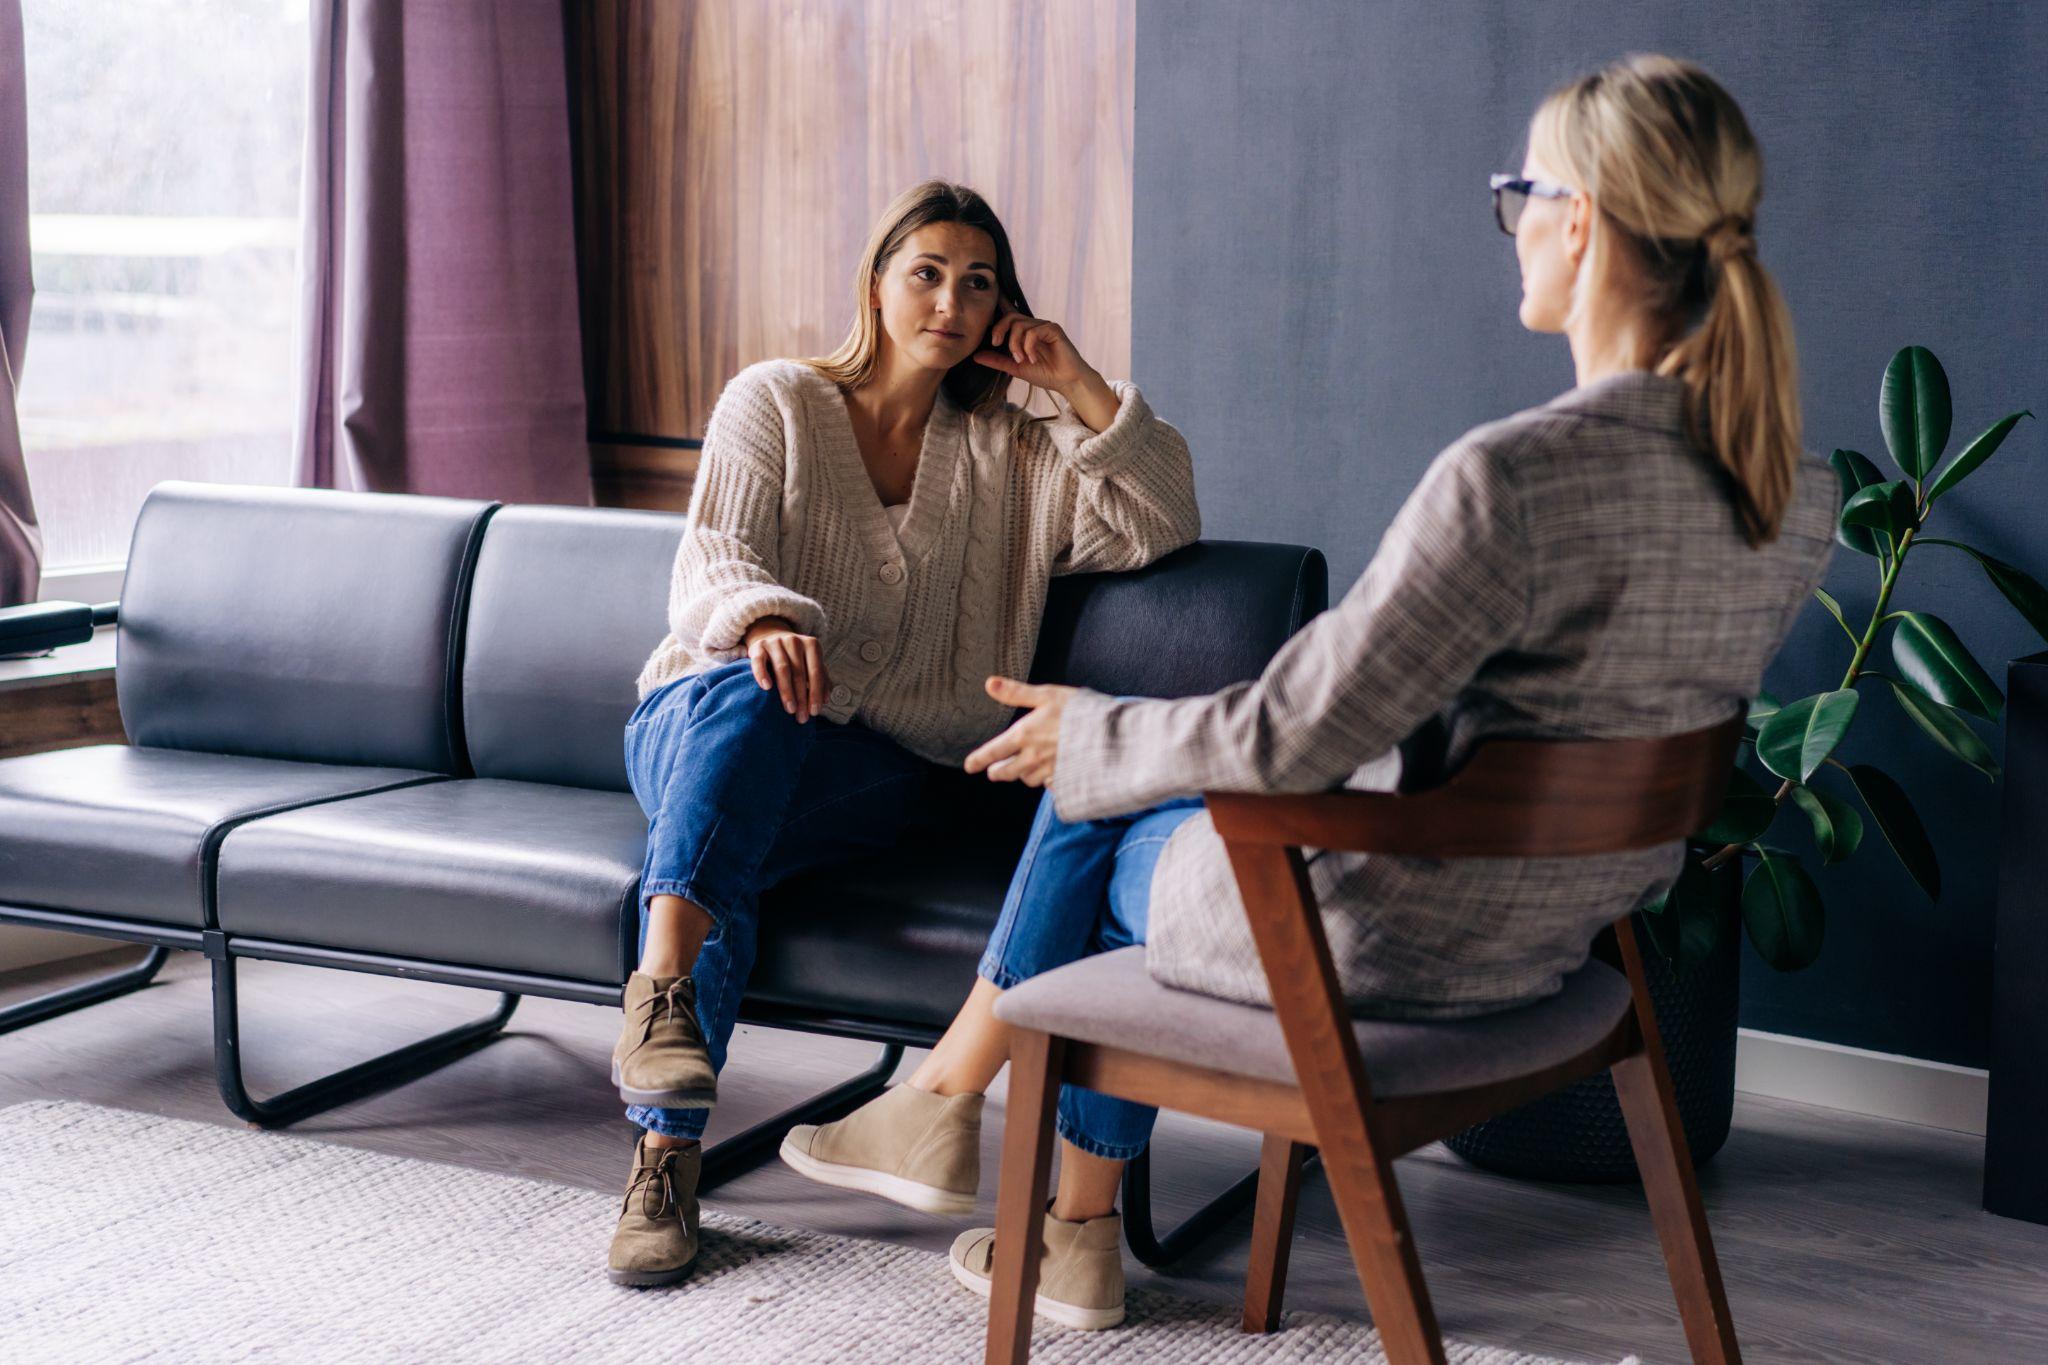 A young woman in a consultation with a professional psychologist listens to advice on improving behavior in life.